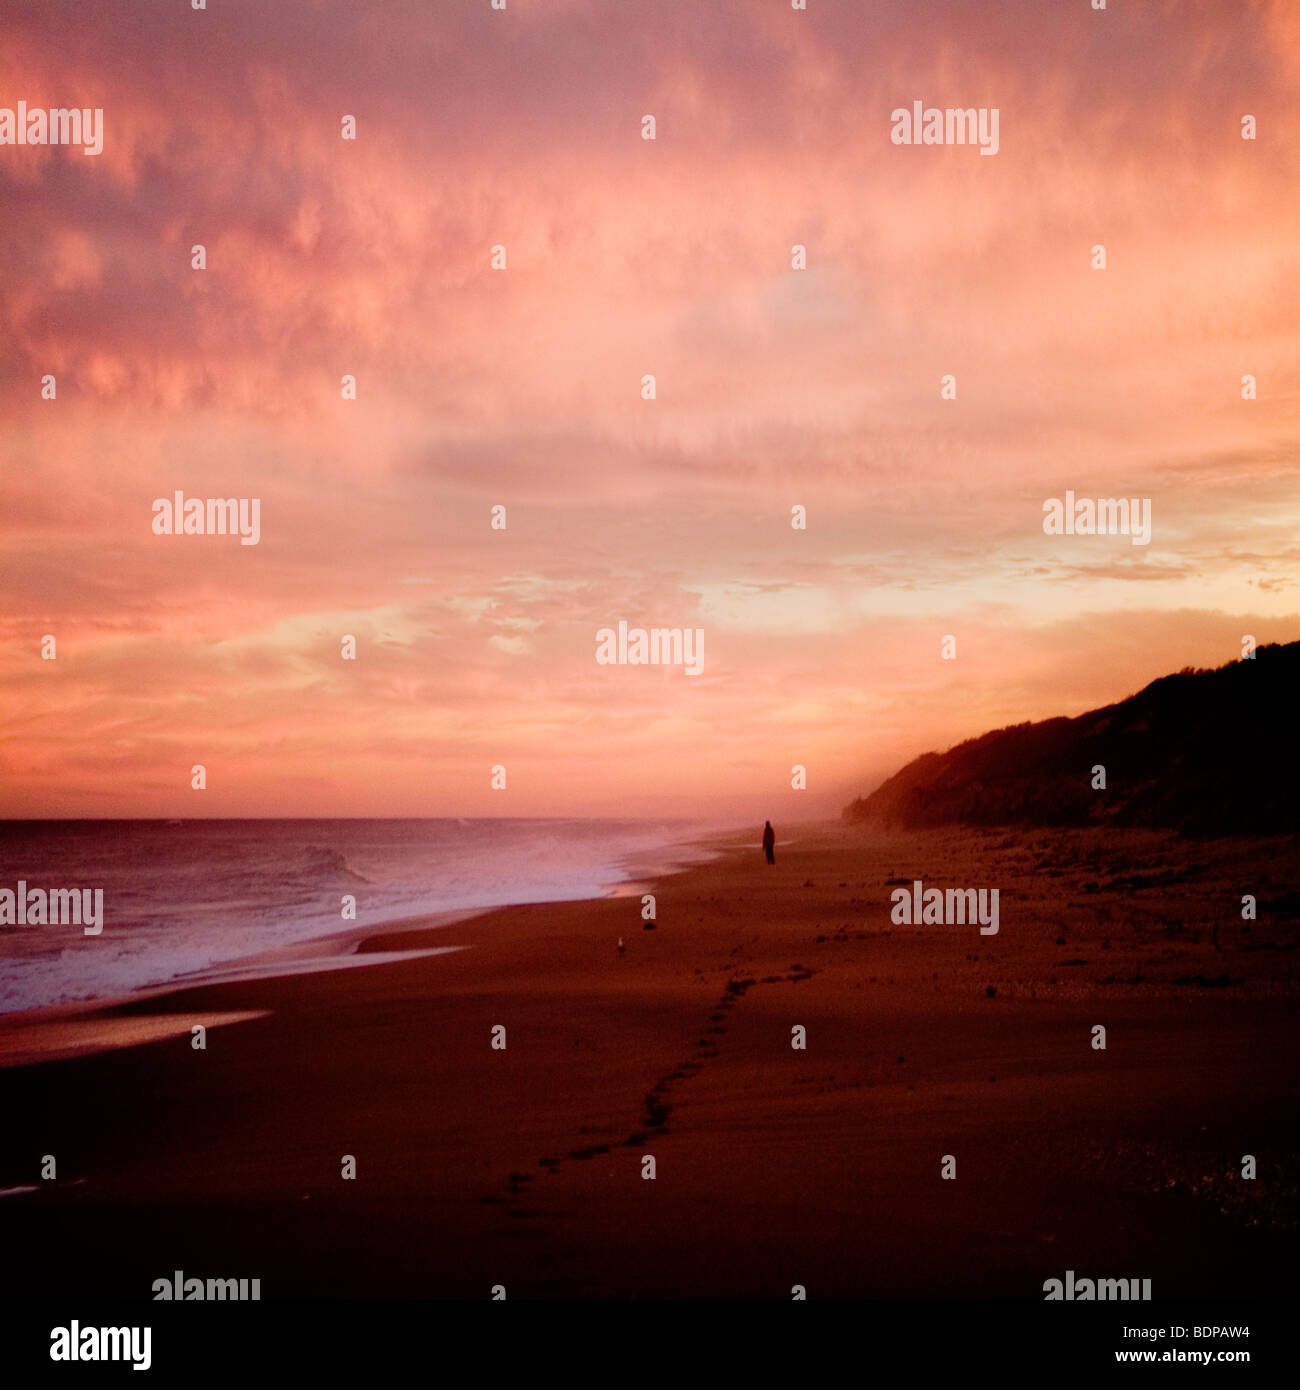 The Australian coast at sunset with a figure in the distance Stock Photo